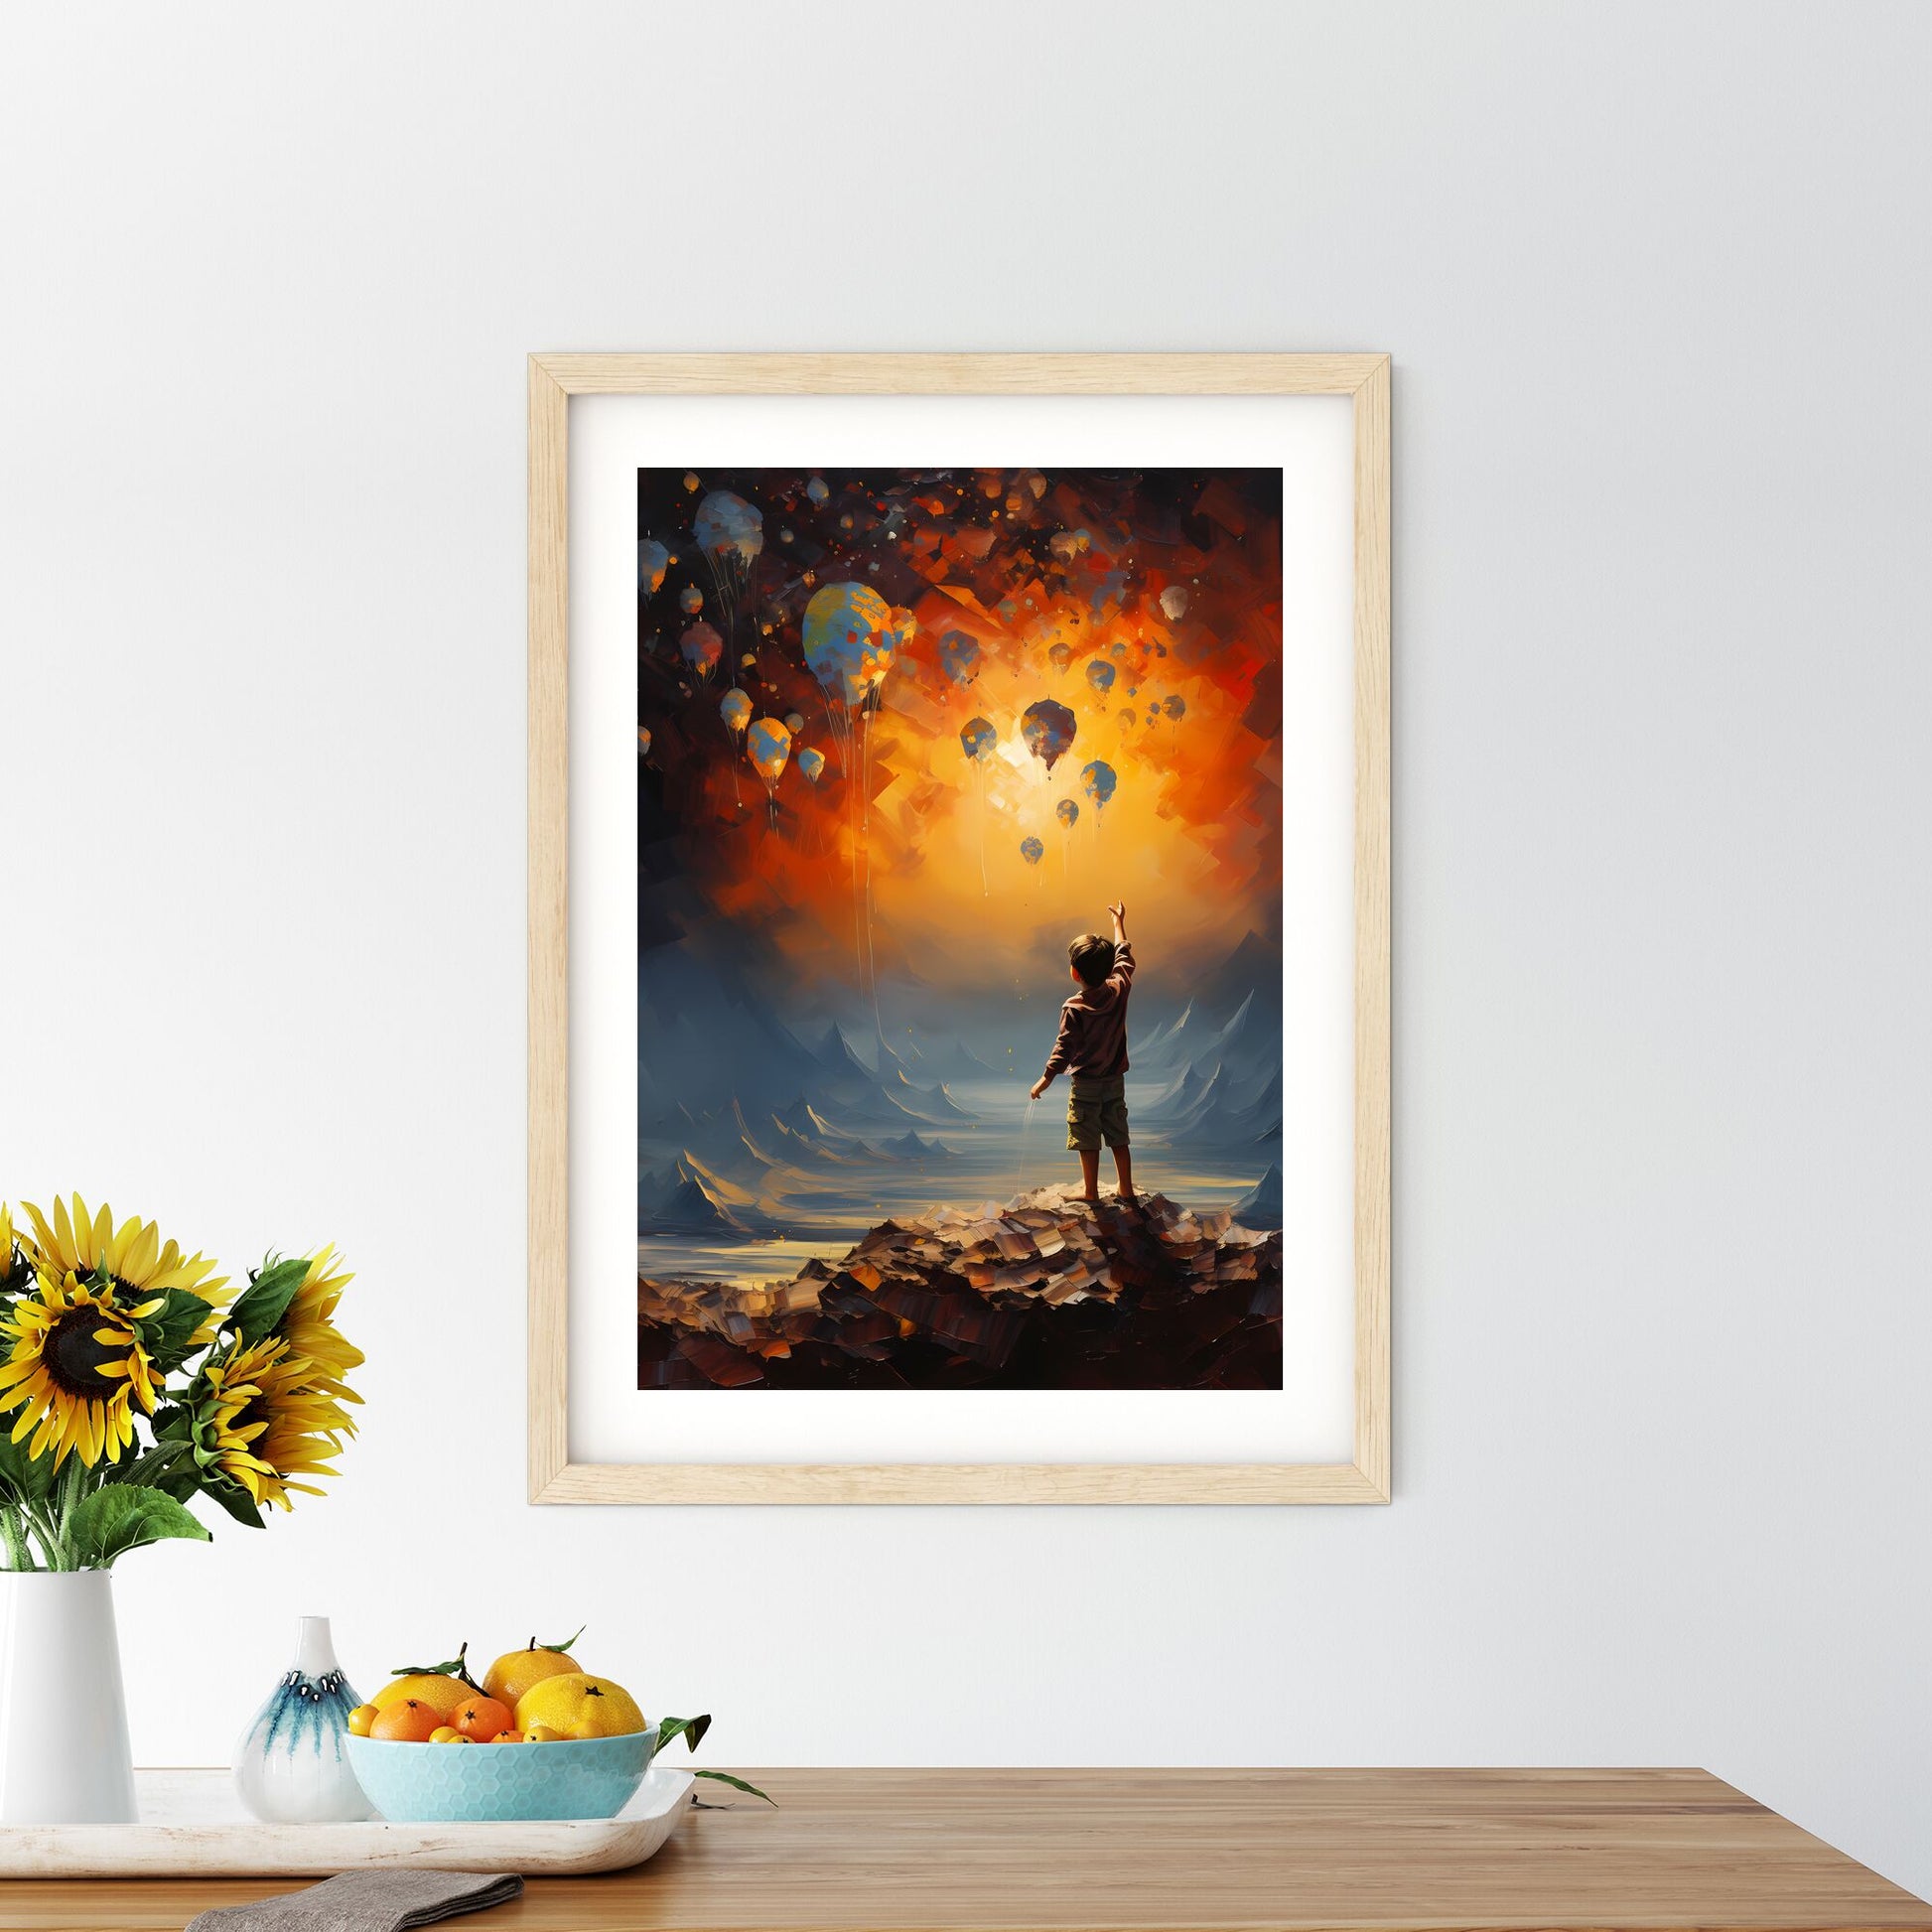 A Child Standing On A Mountain With Balloons In The Sky Art Print Default Title